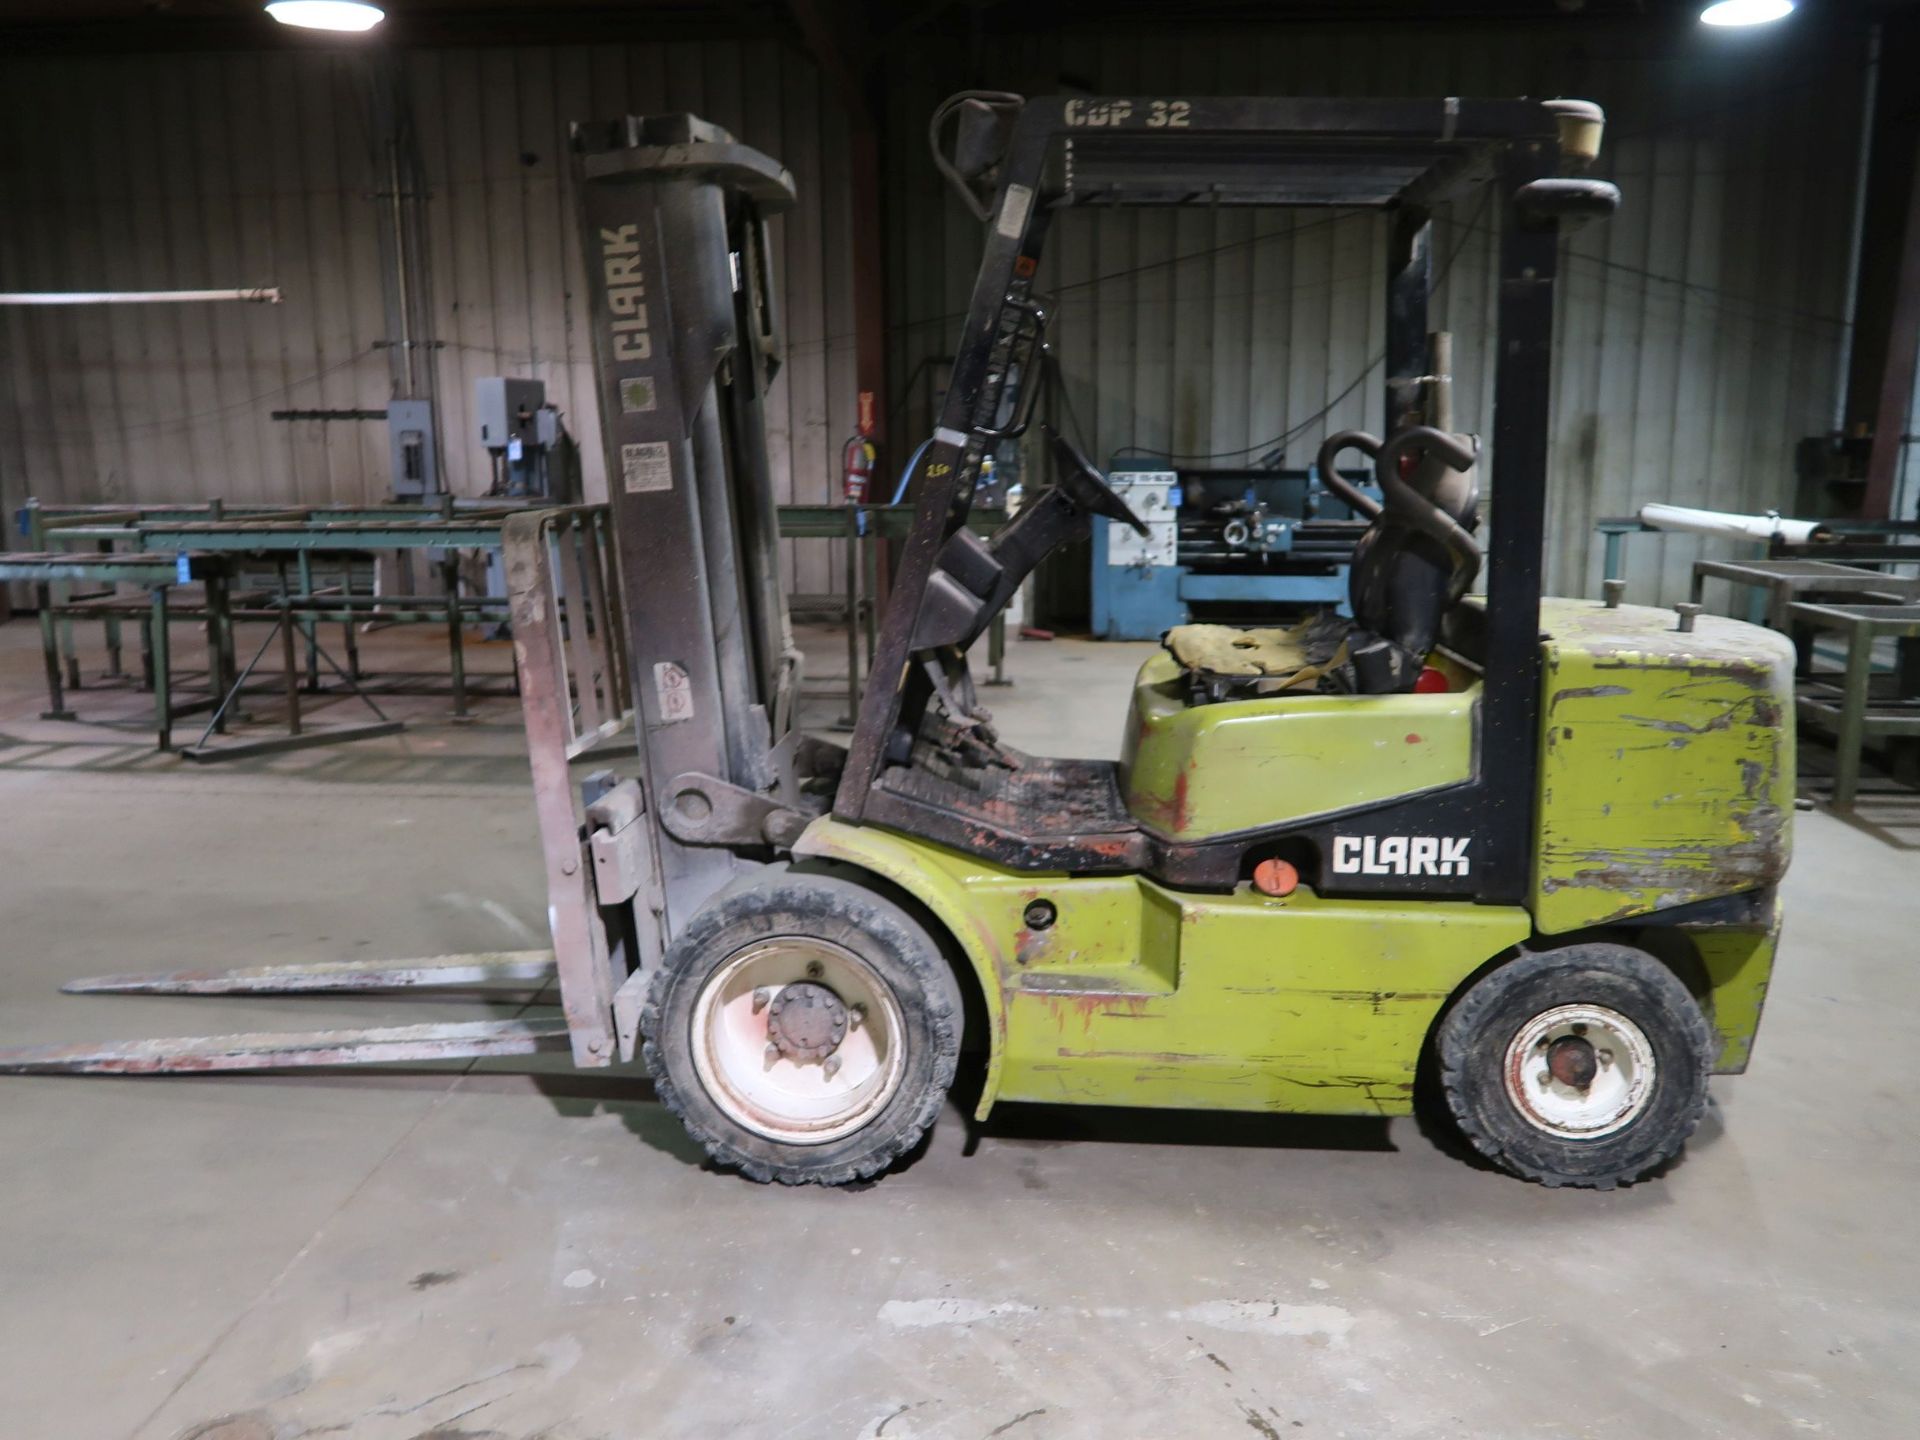 6,000 LB. CLARK MODEL CGP32 DIESEL POWERED SOLID TIRE TWO-STAGE LIFT TRUCK; S/N P365D-0748-9527FB, - Image 8 of 11